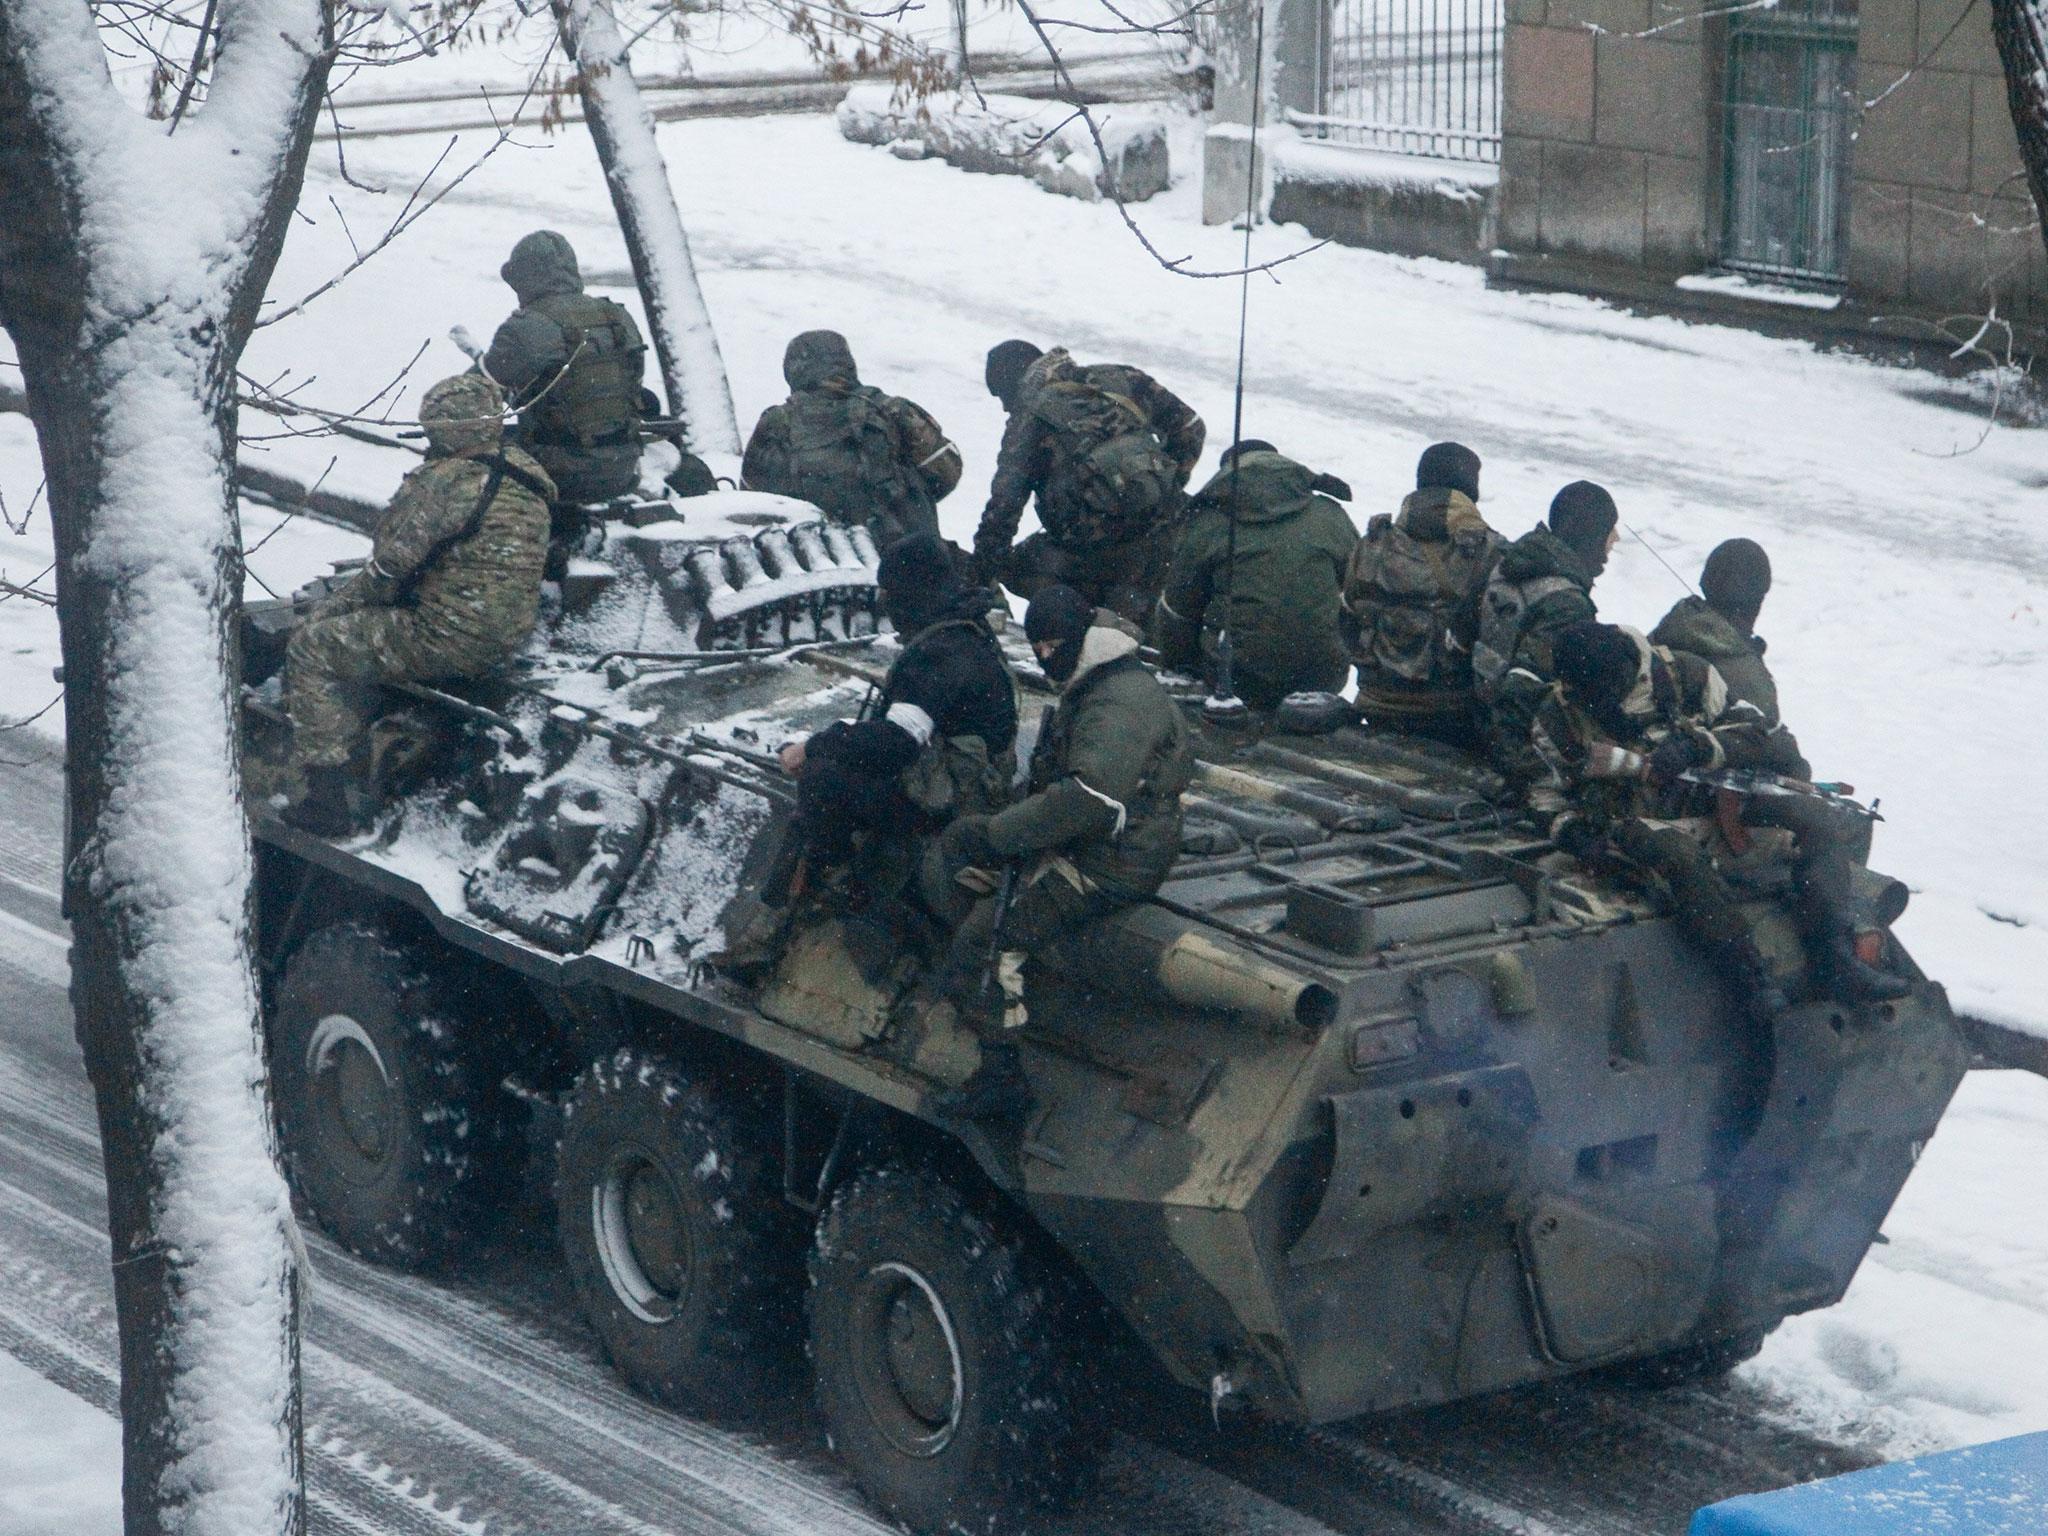 Armed men without insignia ride on a personnel carrier along a street in Luhansk city, Ukraine, on 23 November 2017